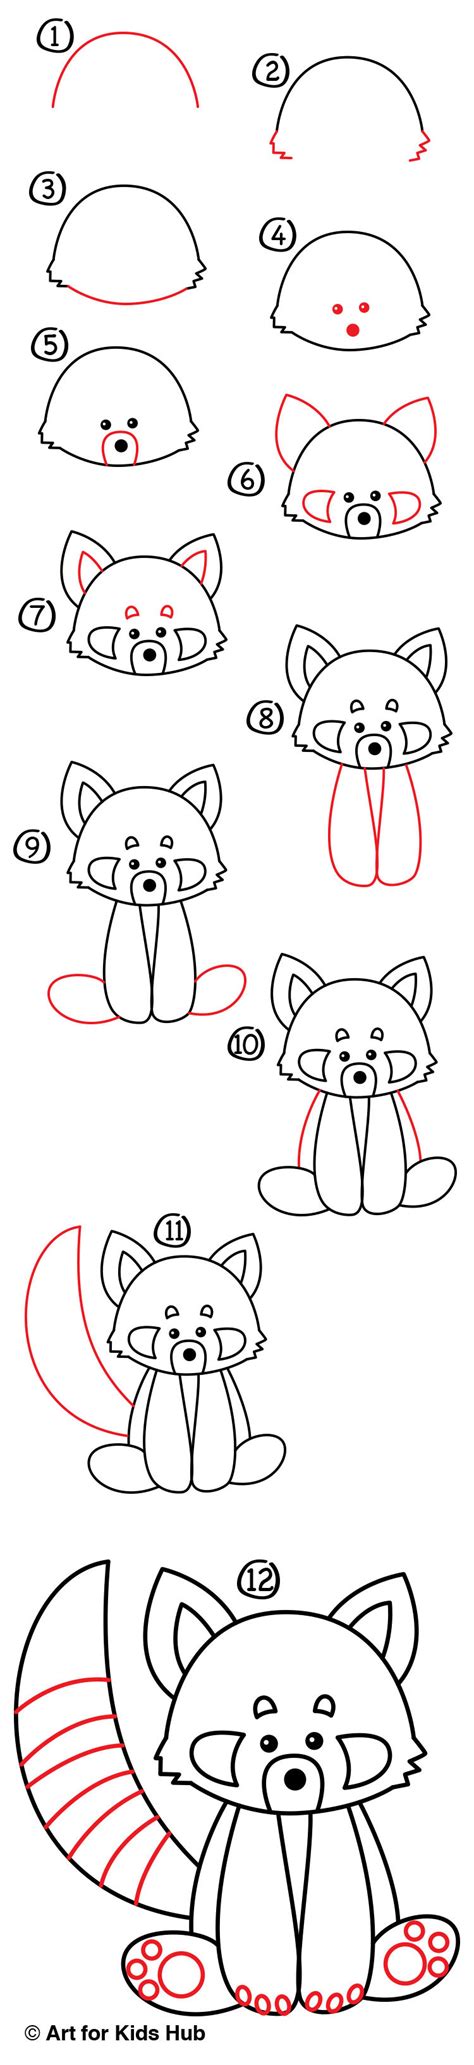 How To Draw A Red Panda Art For Kids Hub